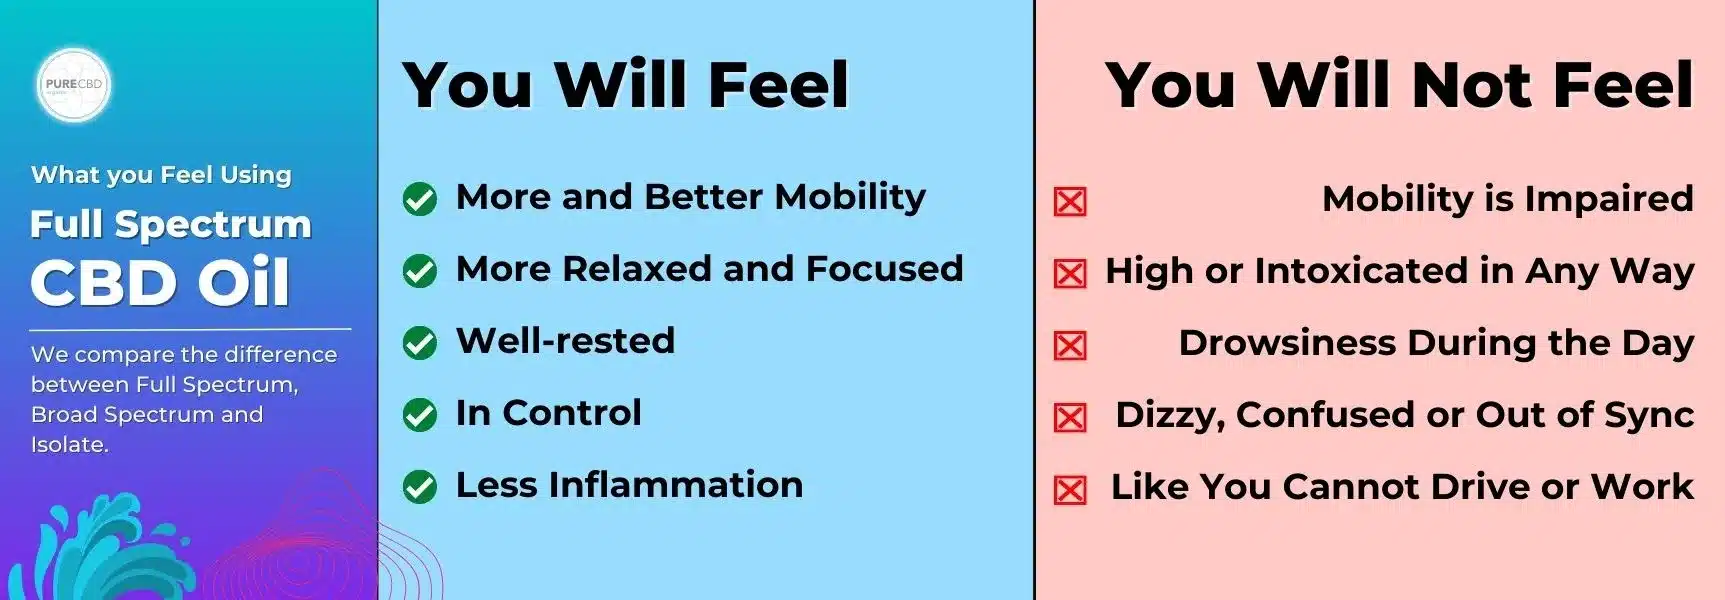 An infographic showing the effects of Full Spectrum CBD oil compared to effects people are scared of when considering taking the product. There are two sections to this one labeled "You will feel" with the other section labeled "You will not feel". They work to clear up any confusion for potential customers.